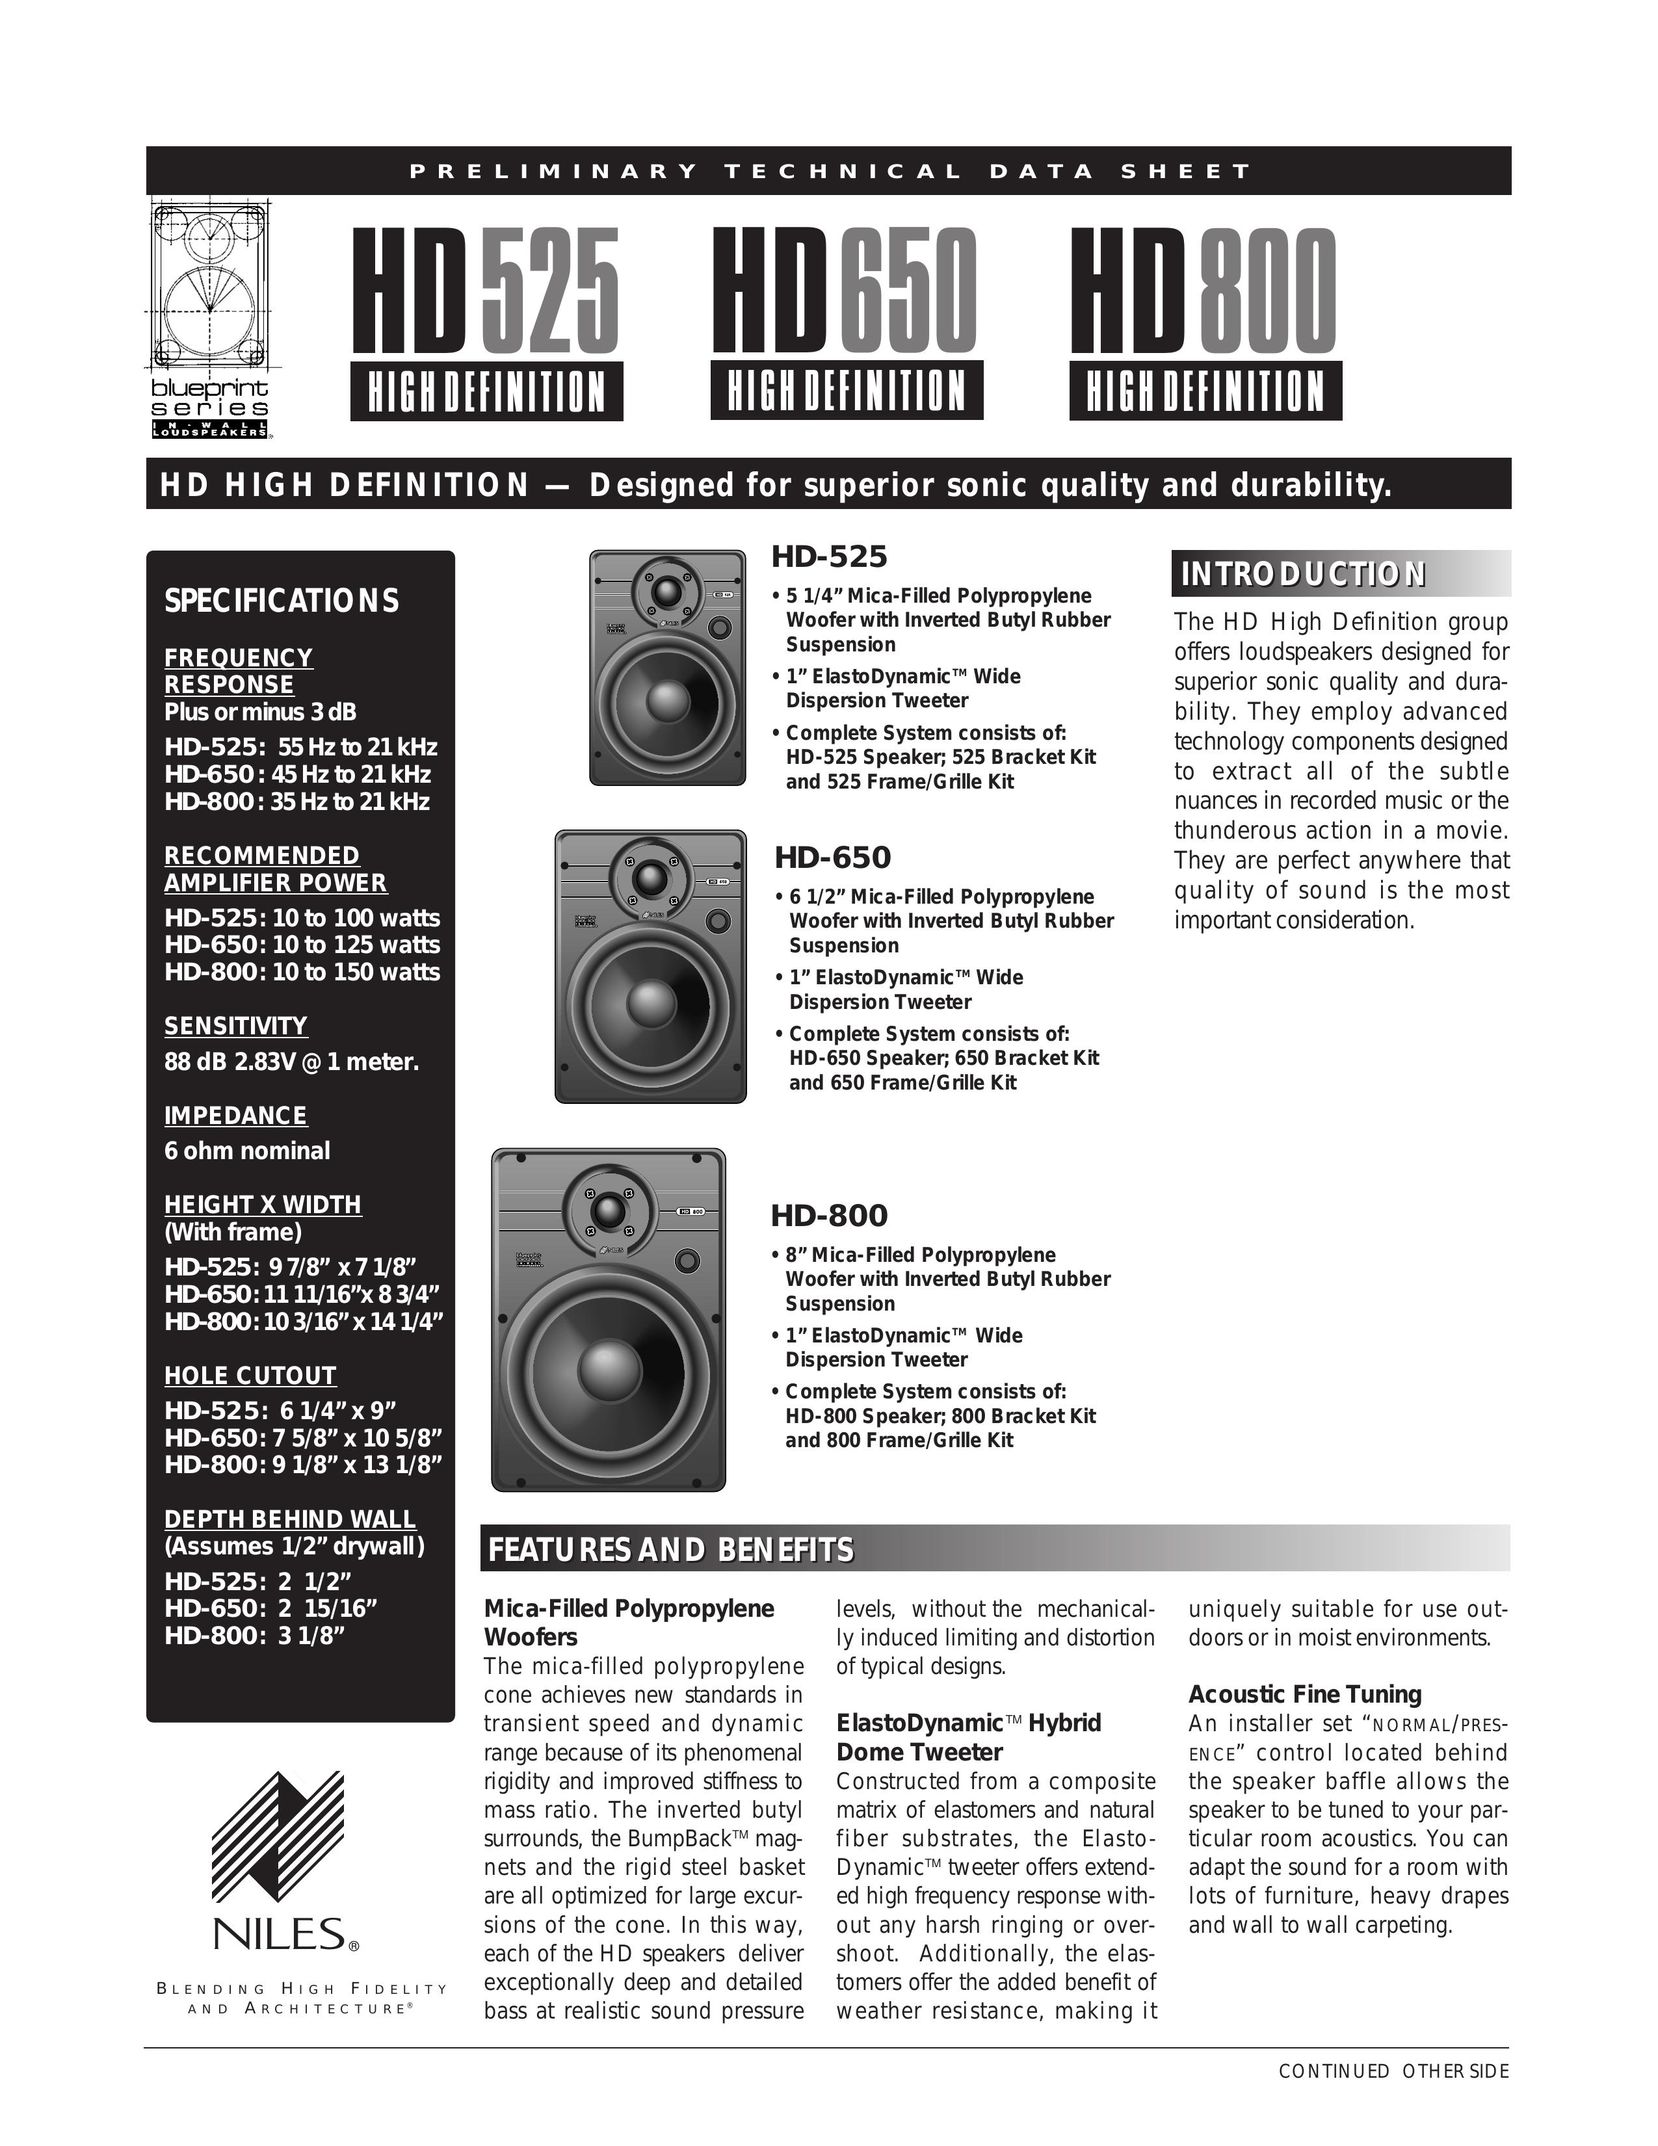 Niles Audio HD-525: 55 Hz to 21 kHz Home Theater System User Manual